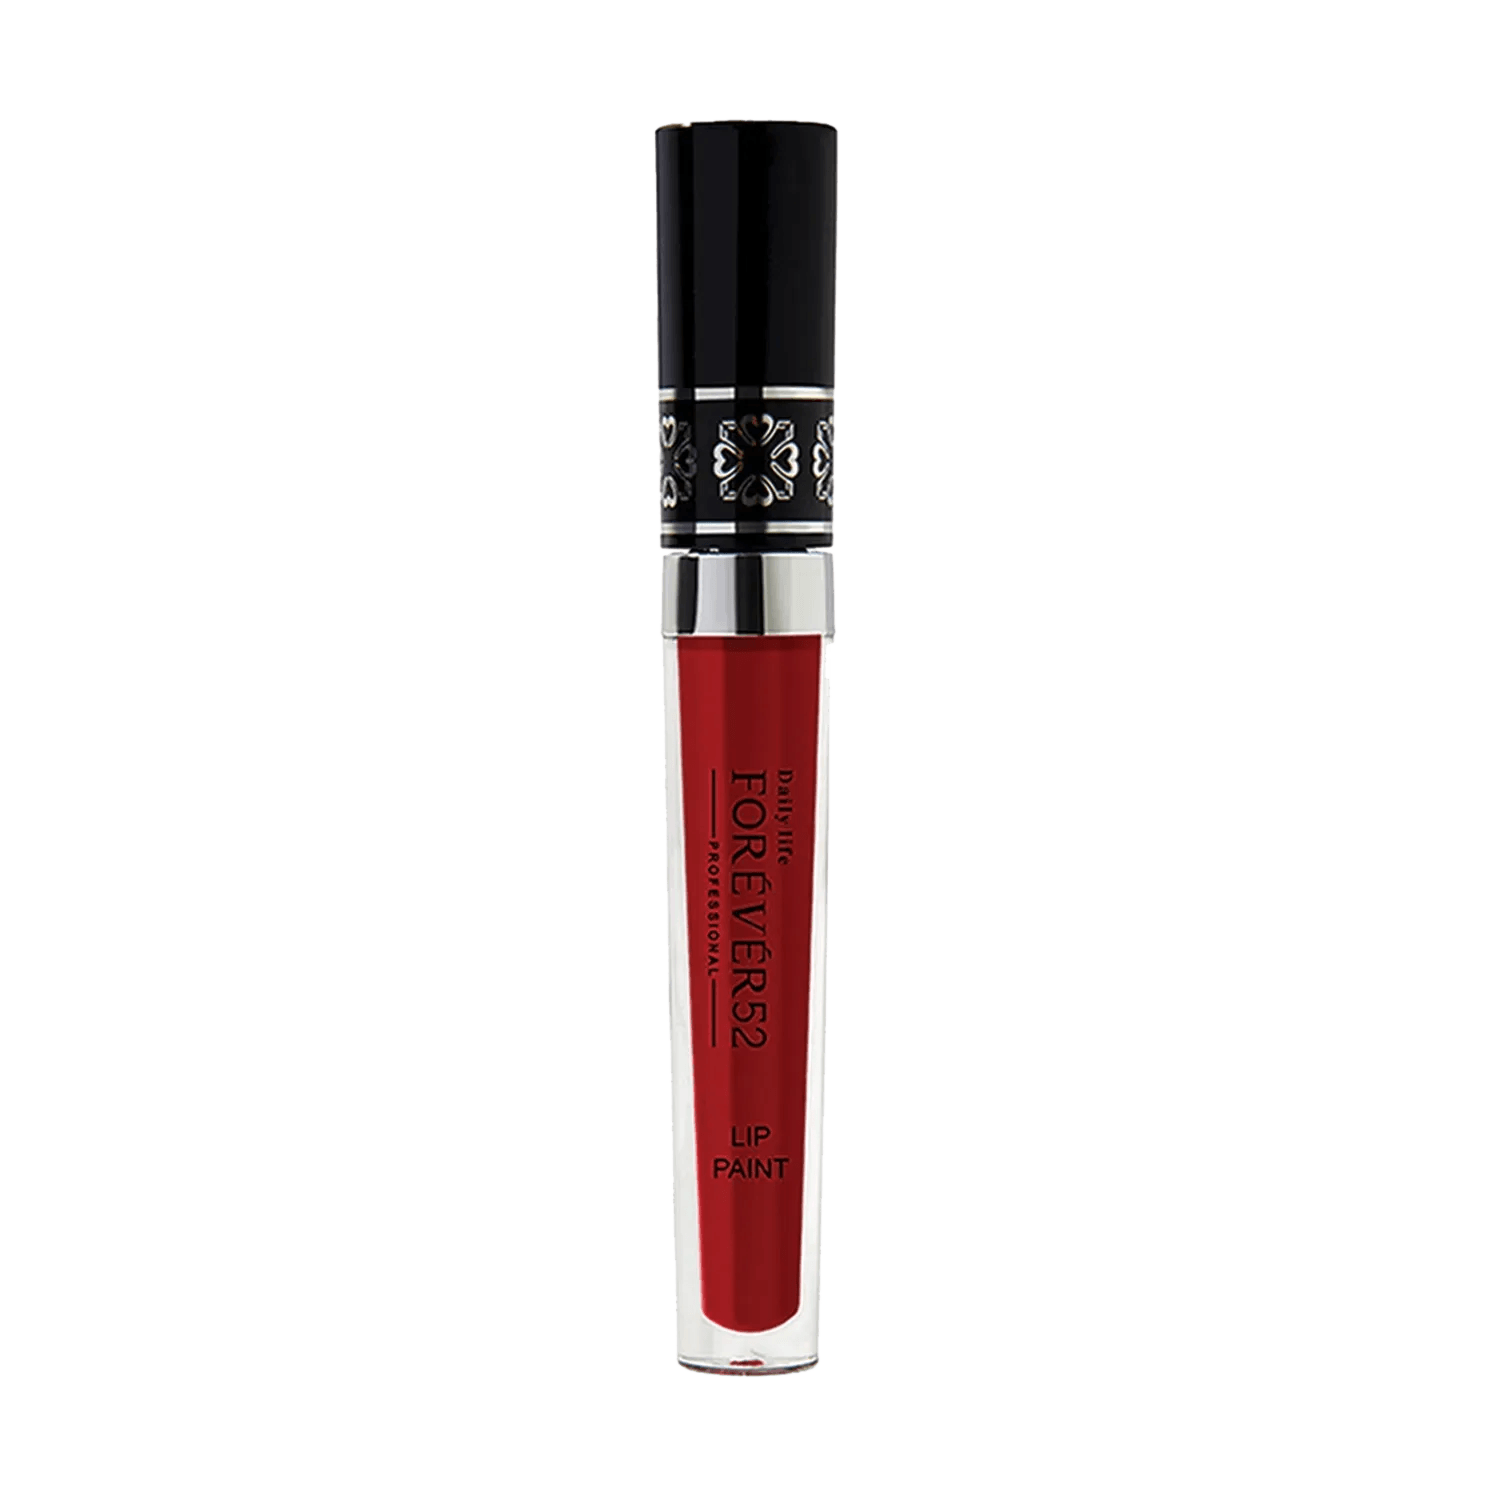 Daily Life Forever52 | Daily Life Forever52 Lip Paint FM0713 (8gm)